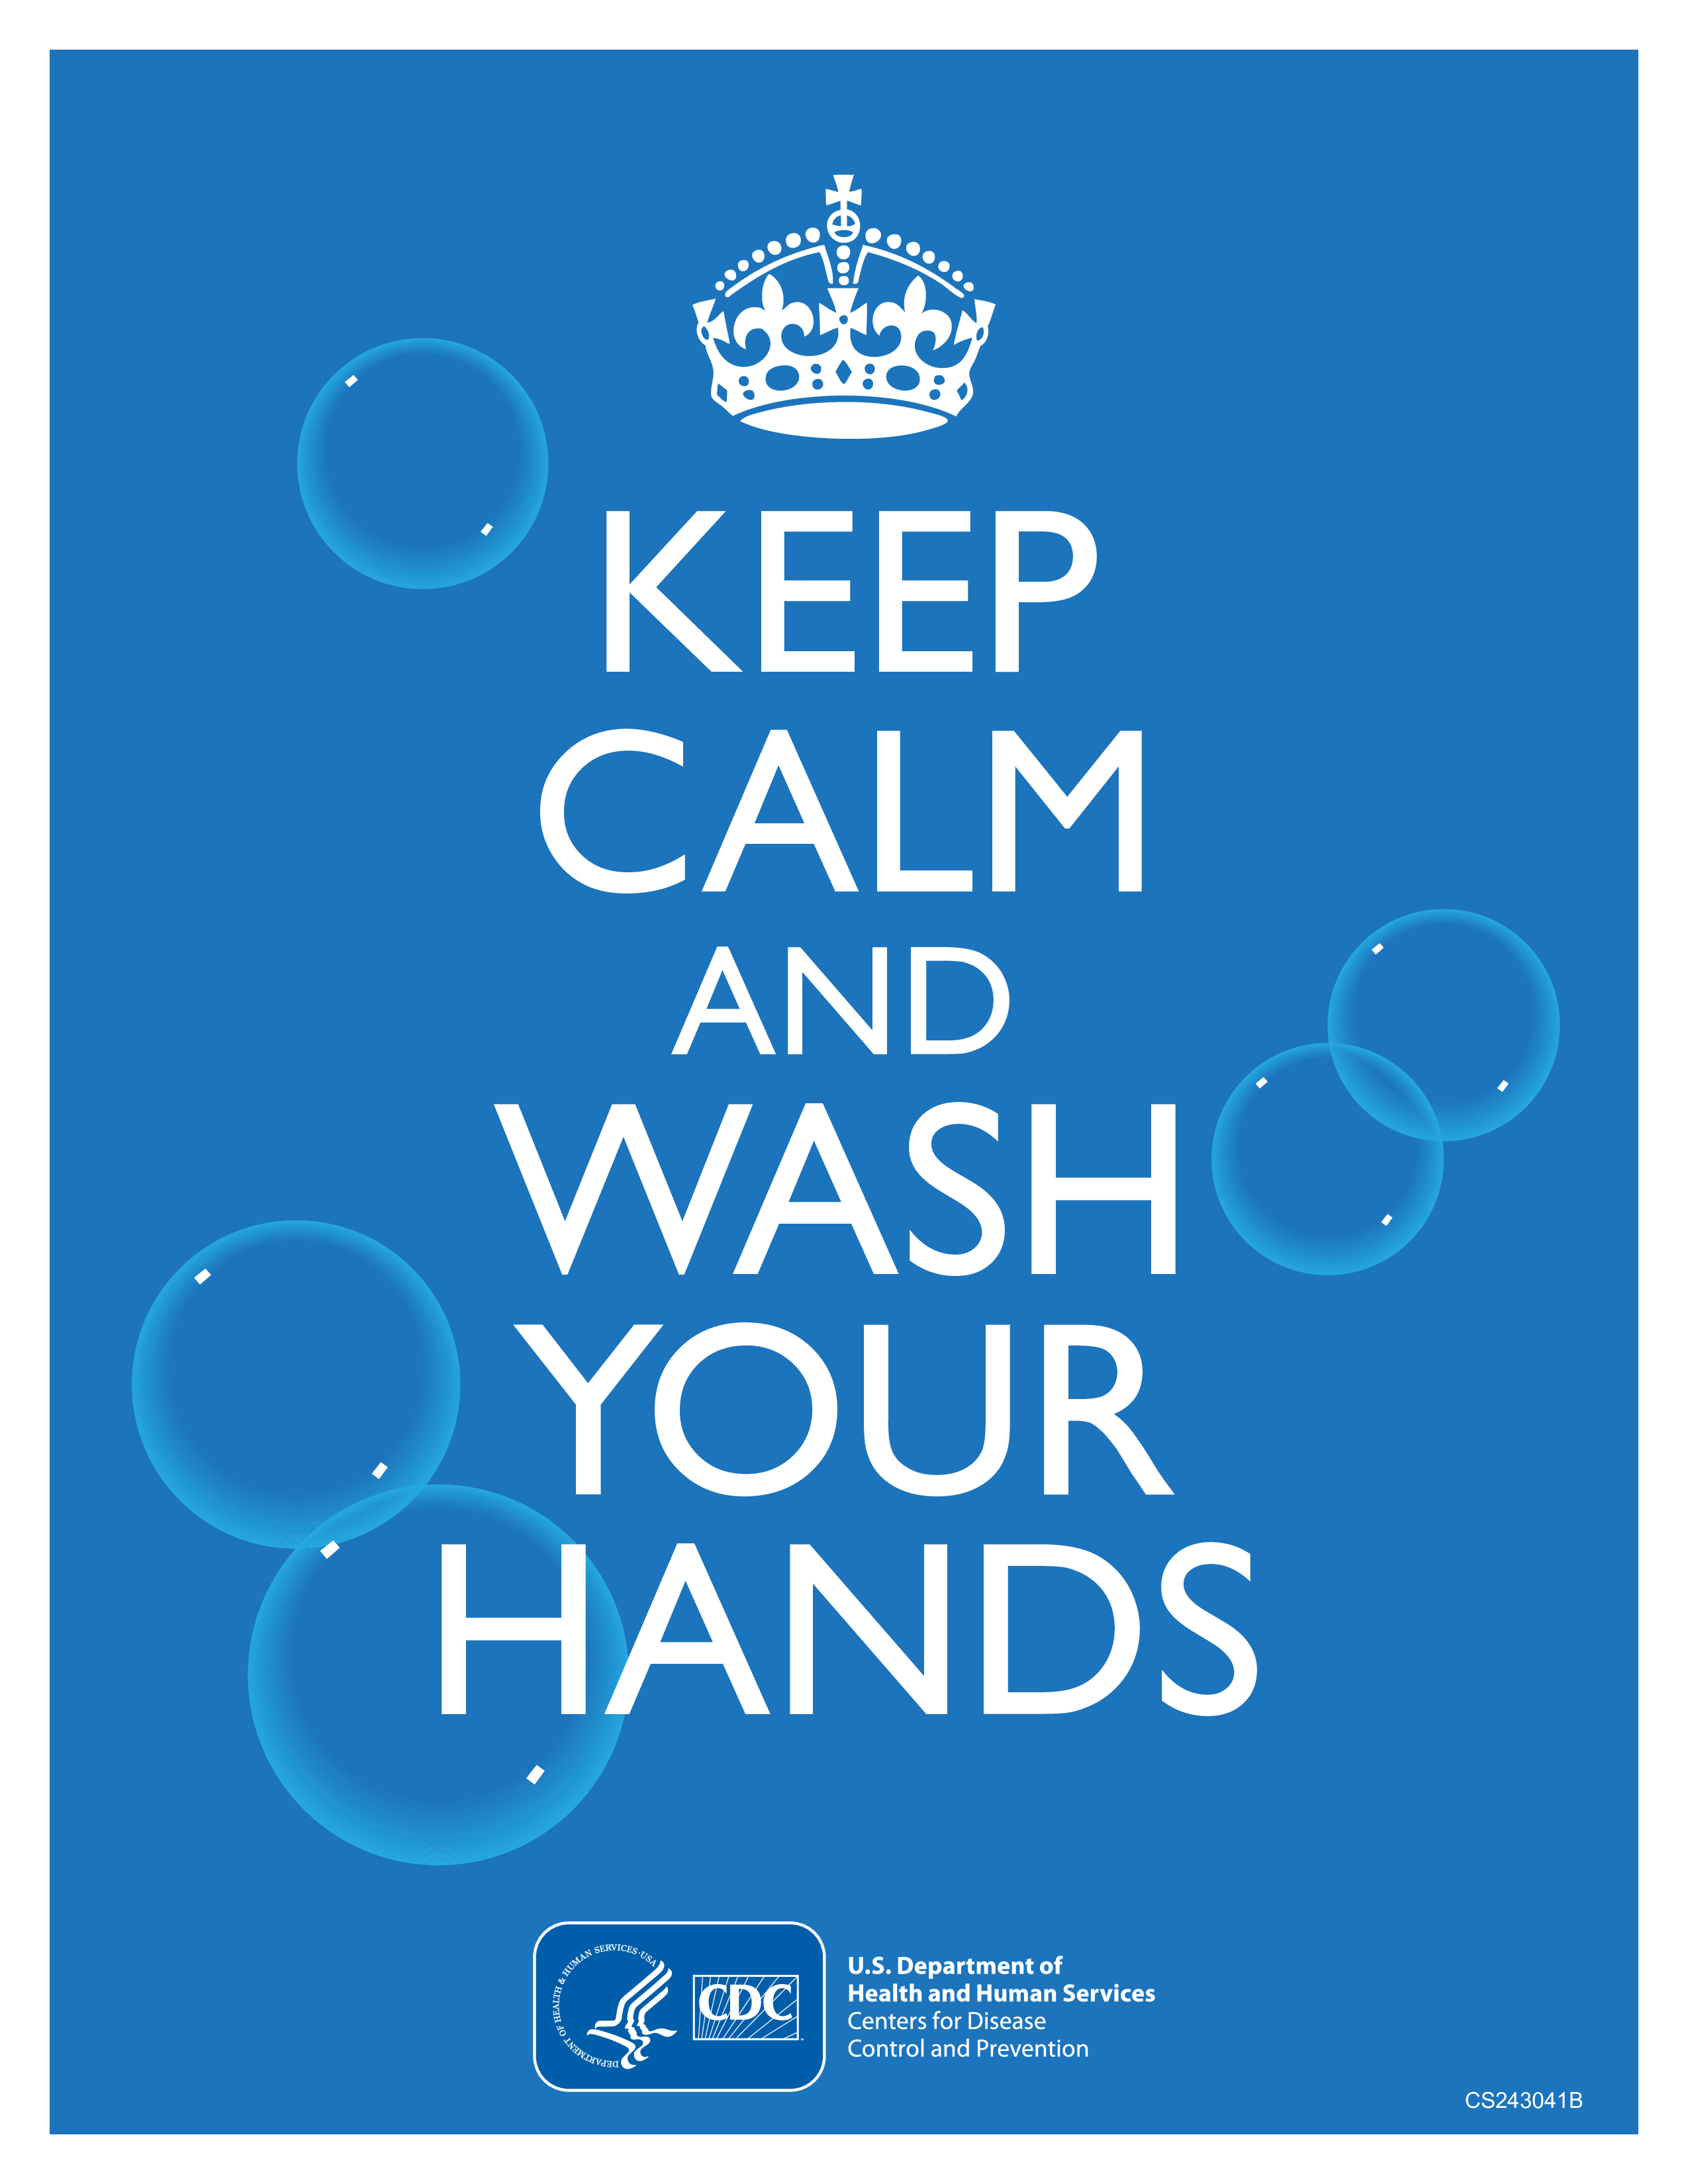 Covid-19 "Wash your hands" 8.5 x 11 poster